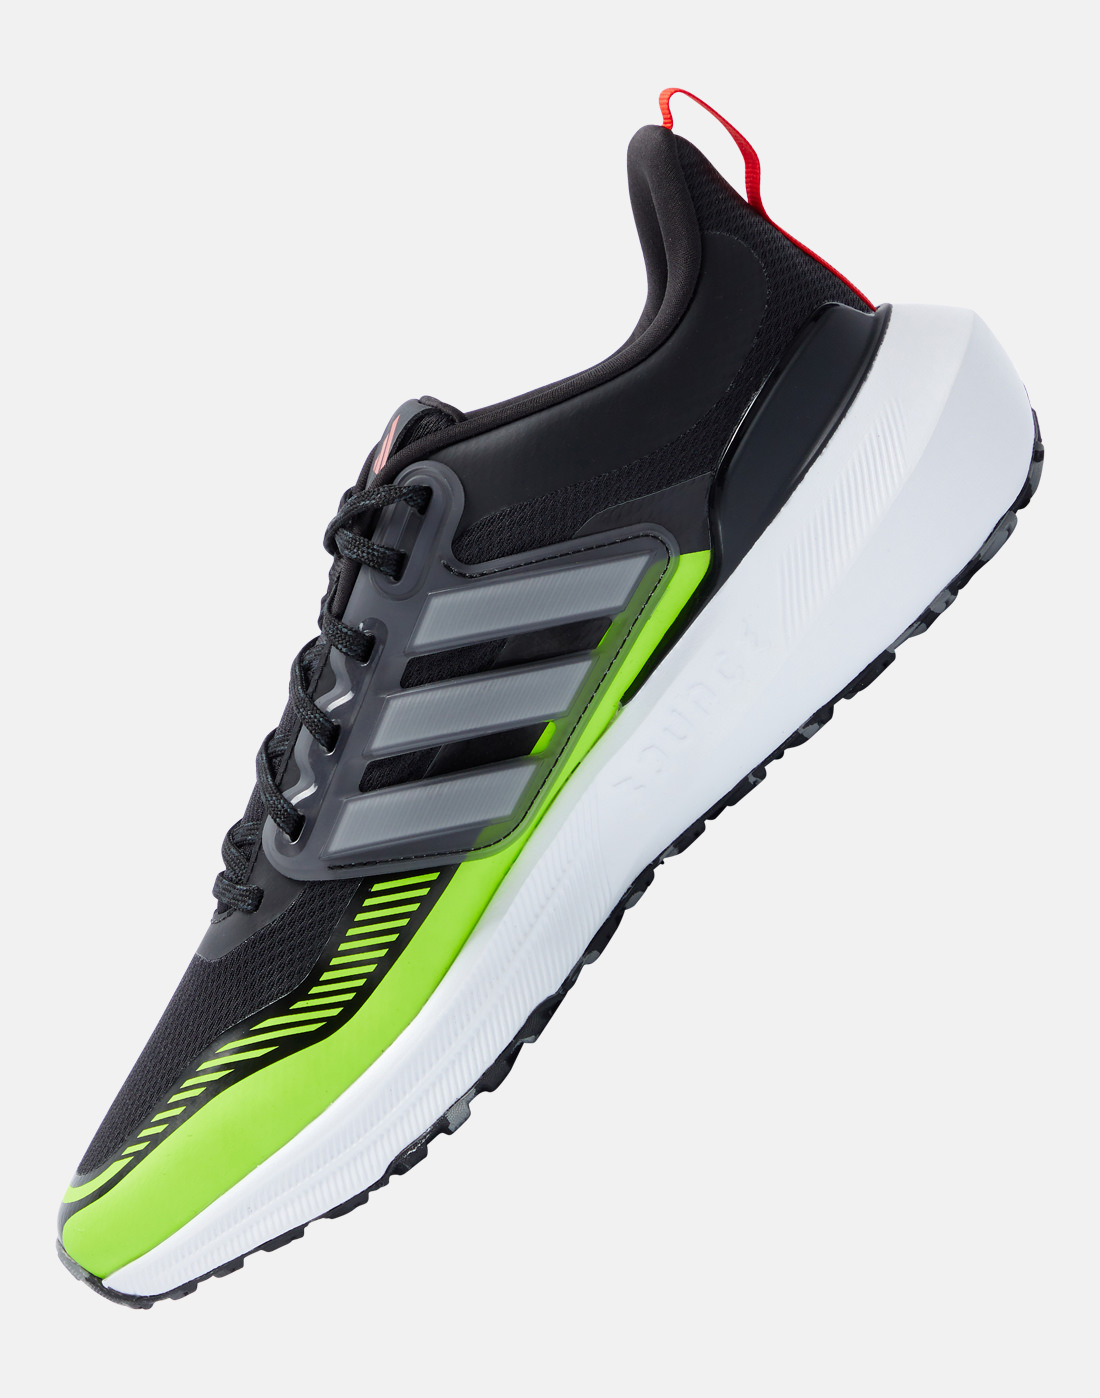 adidas Mens Ultrabounce TR - Black | Life Style Sports IE